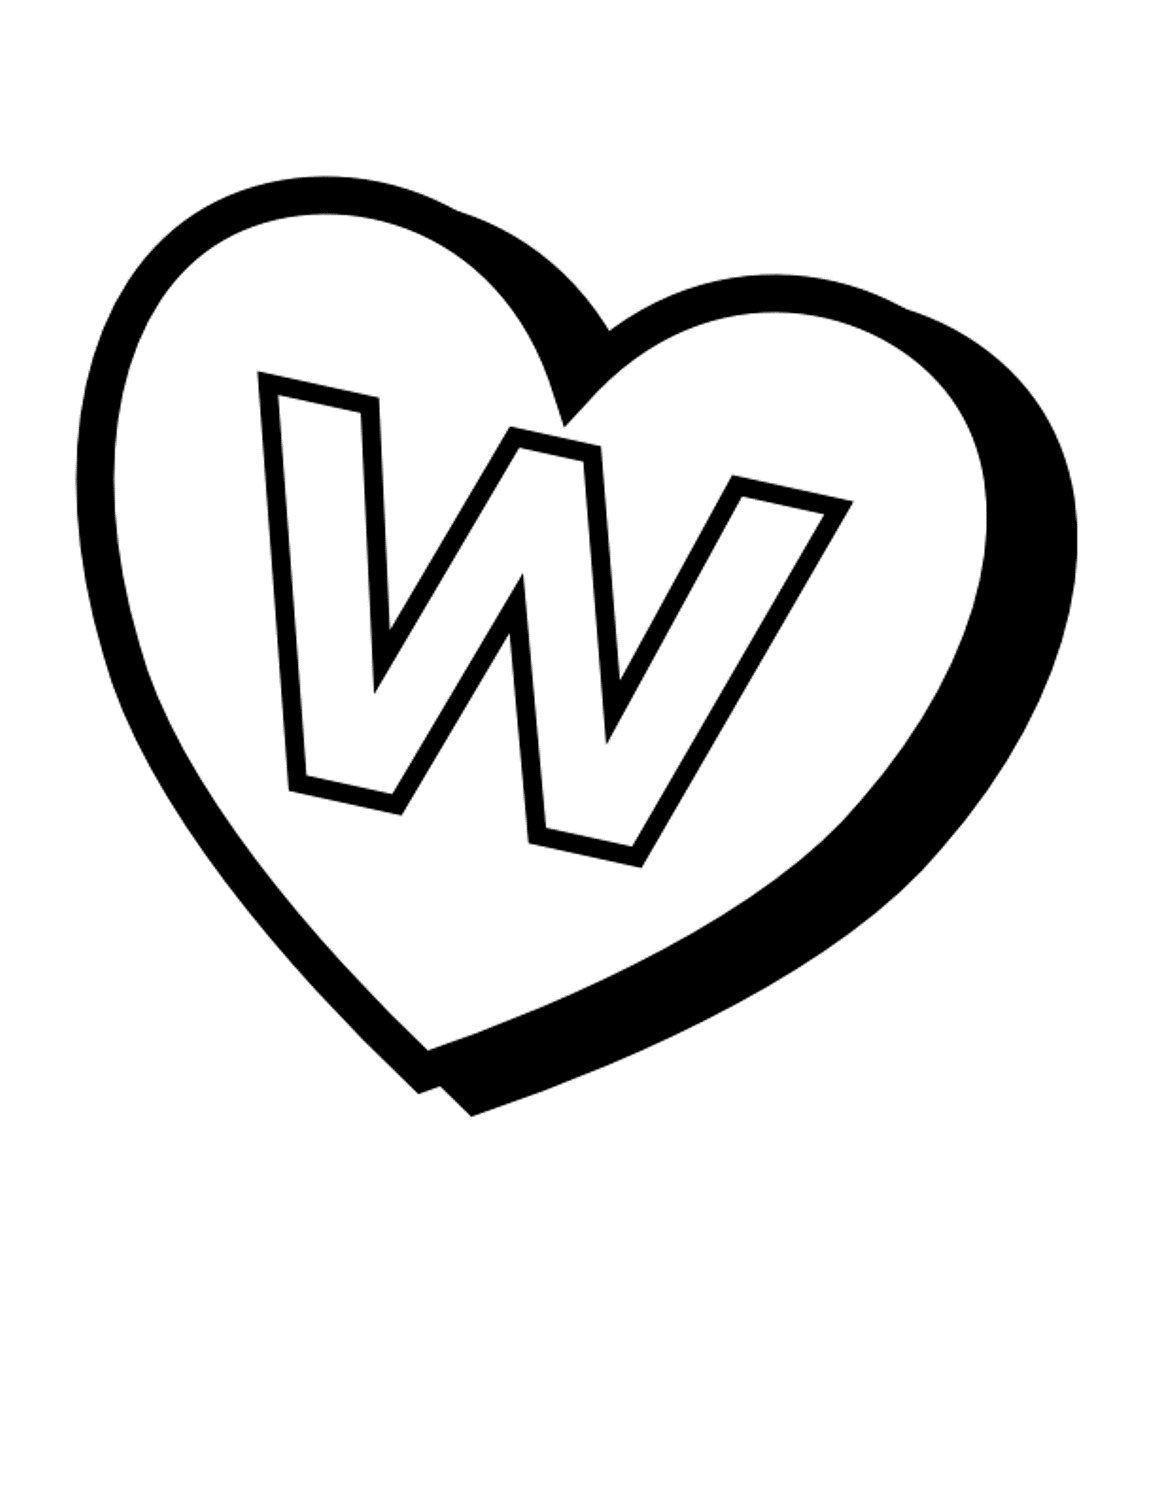 Heart Of W Free Alphabet S6df8 Coloring Page